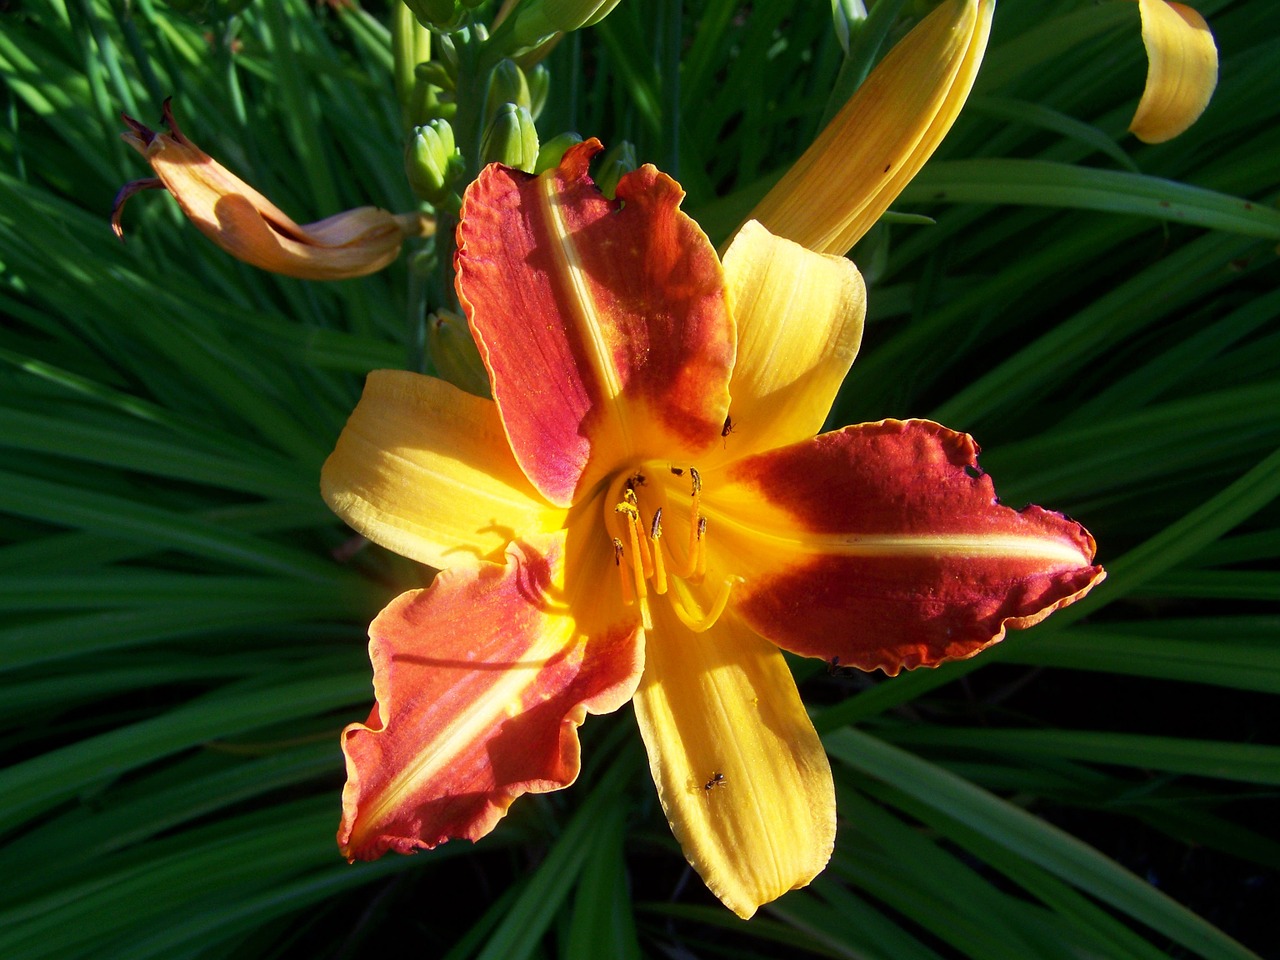 daylily flower garden yellow-orange-red color free photo